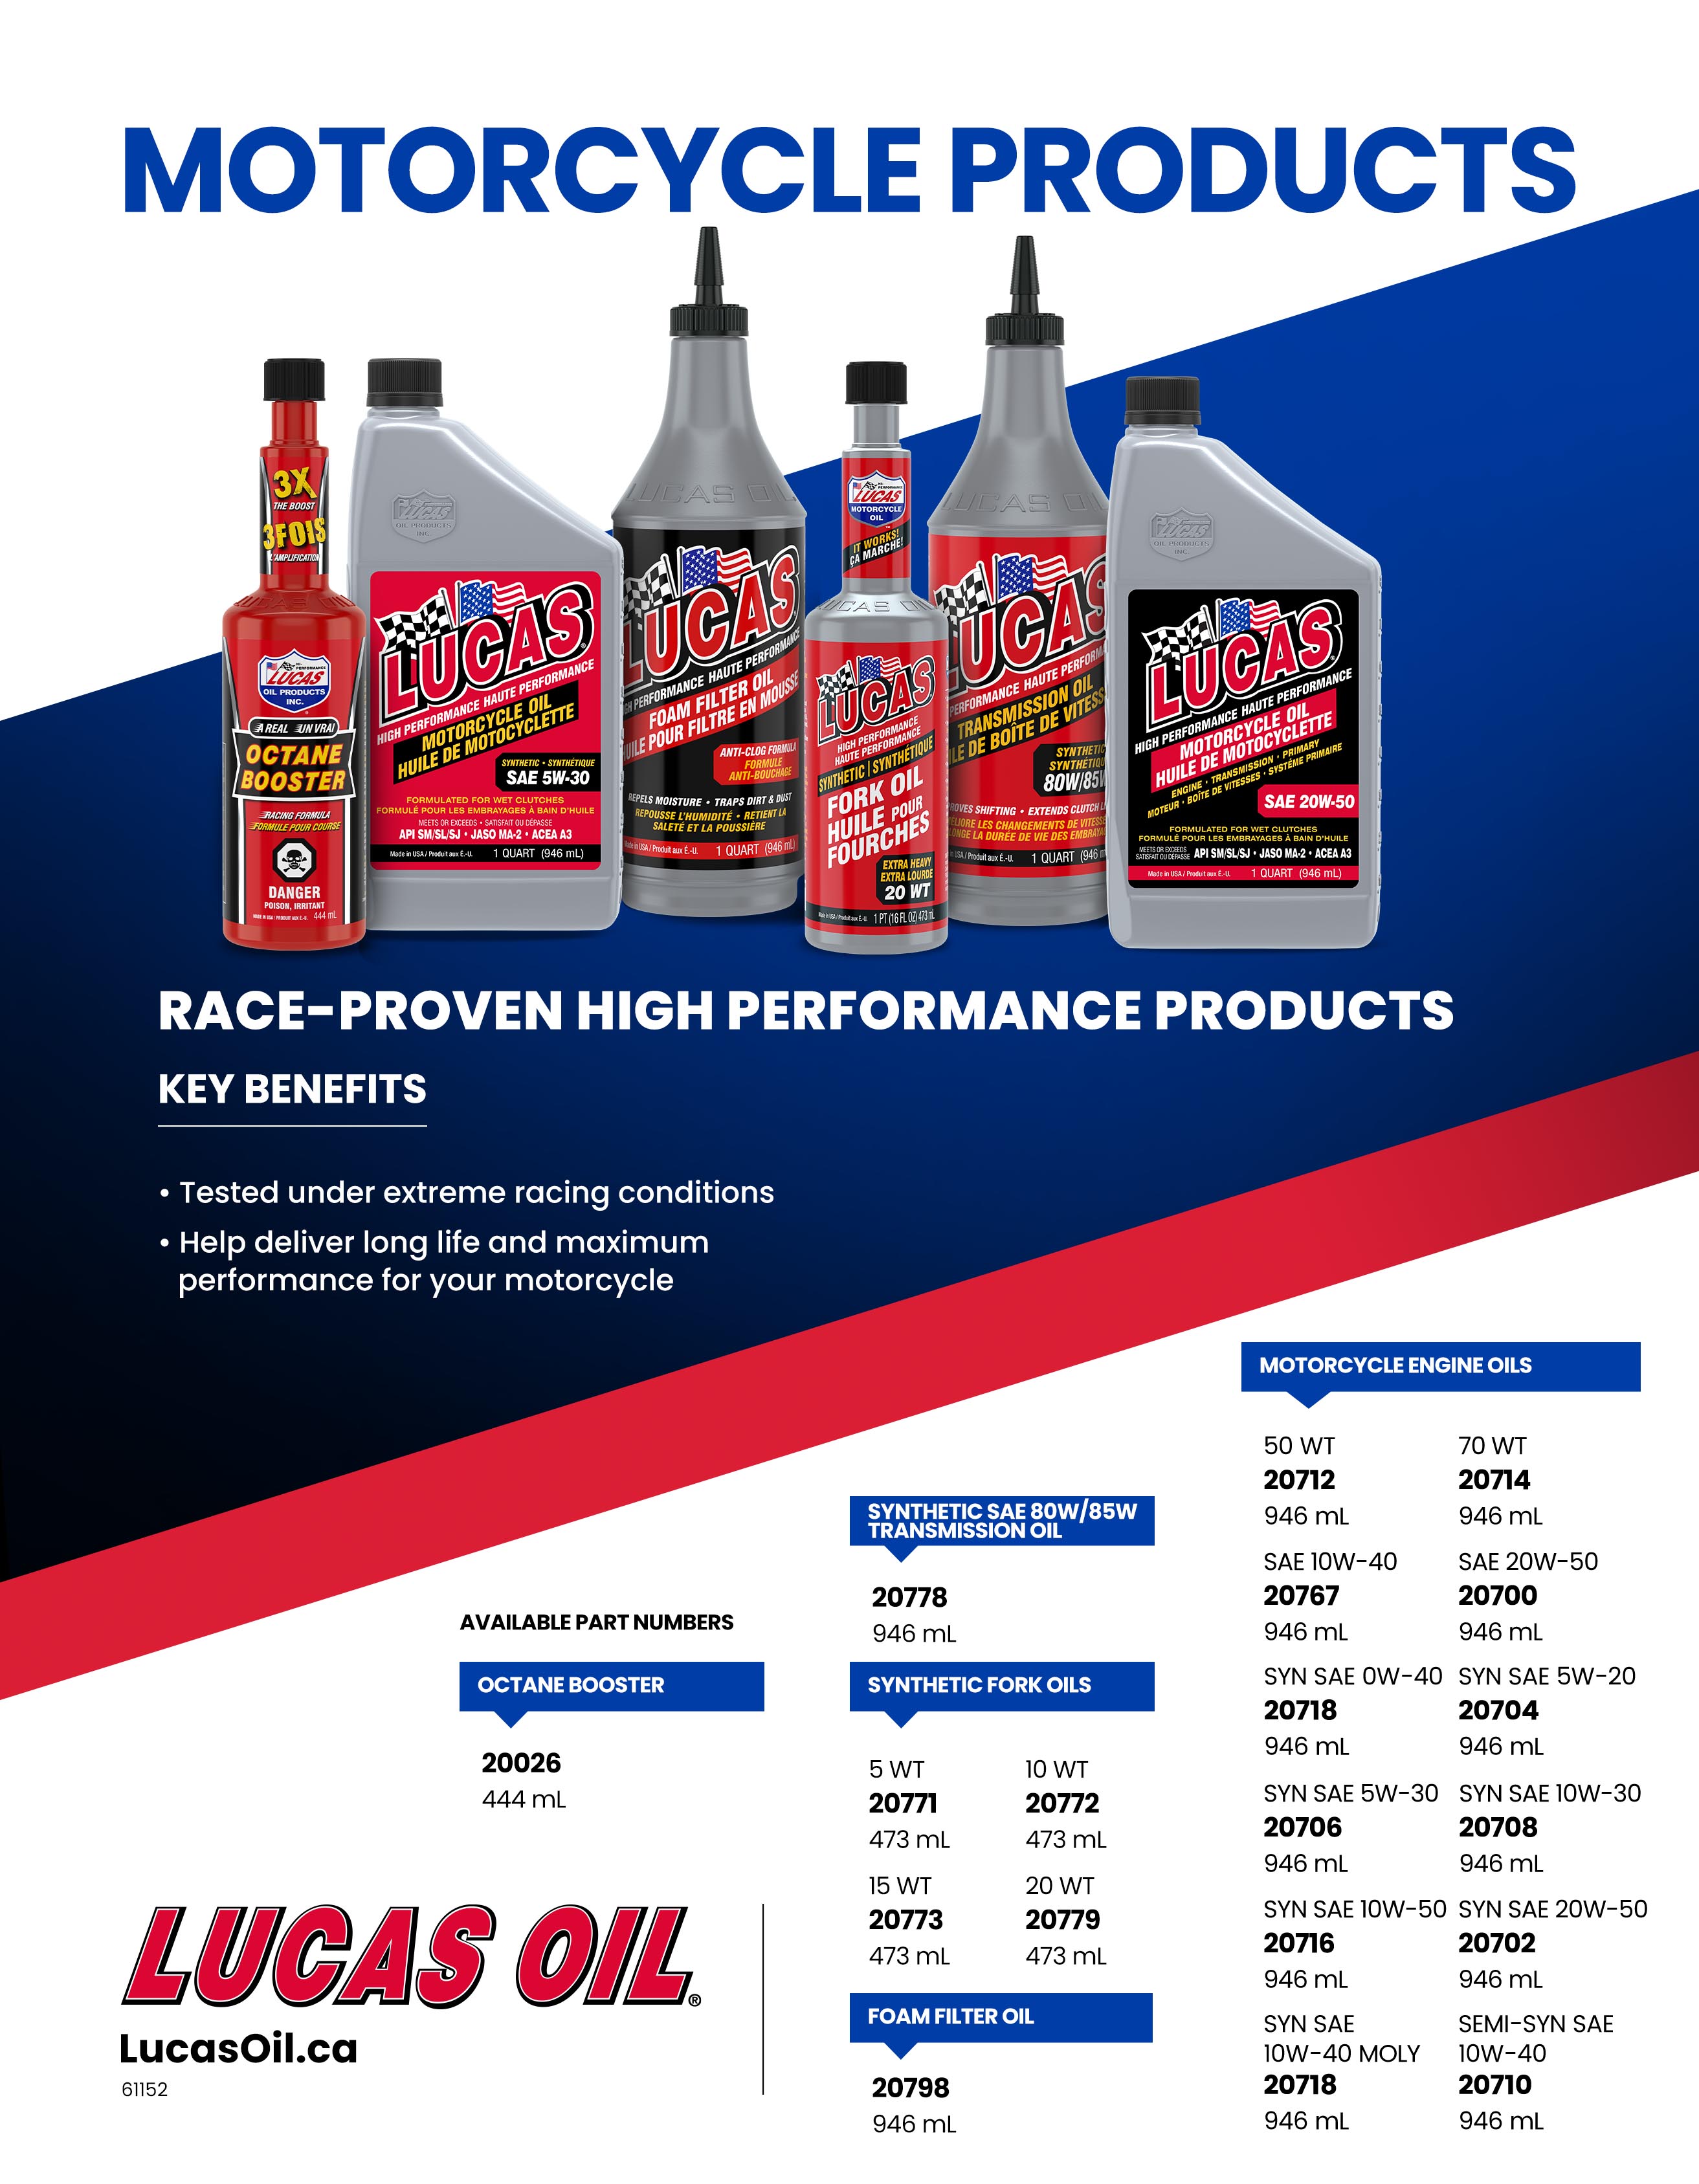 High Performance Conventional Motorcycle Oils